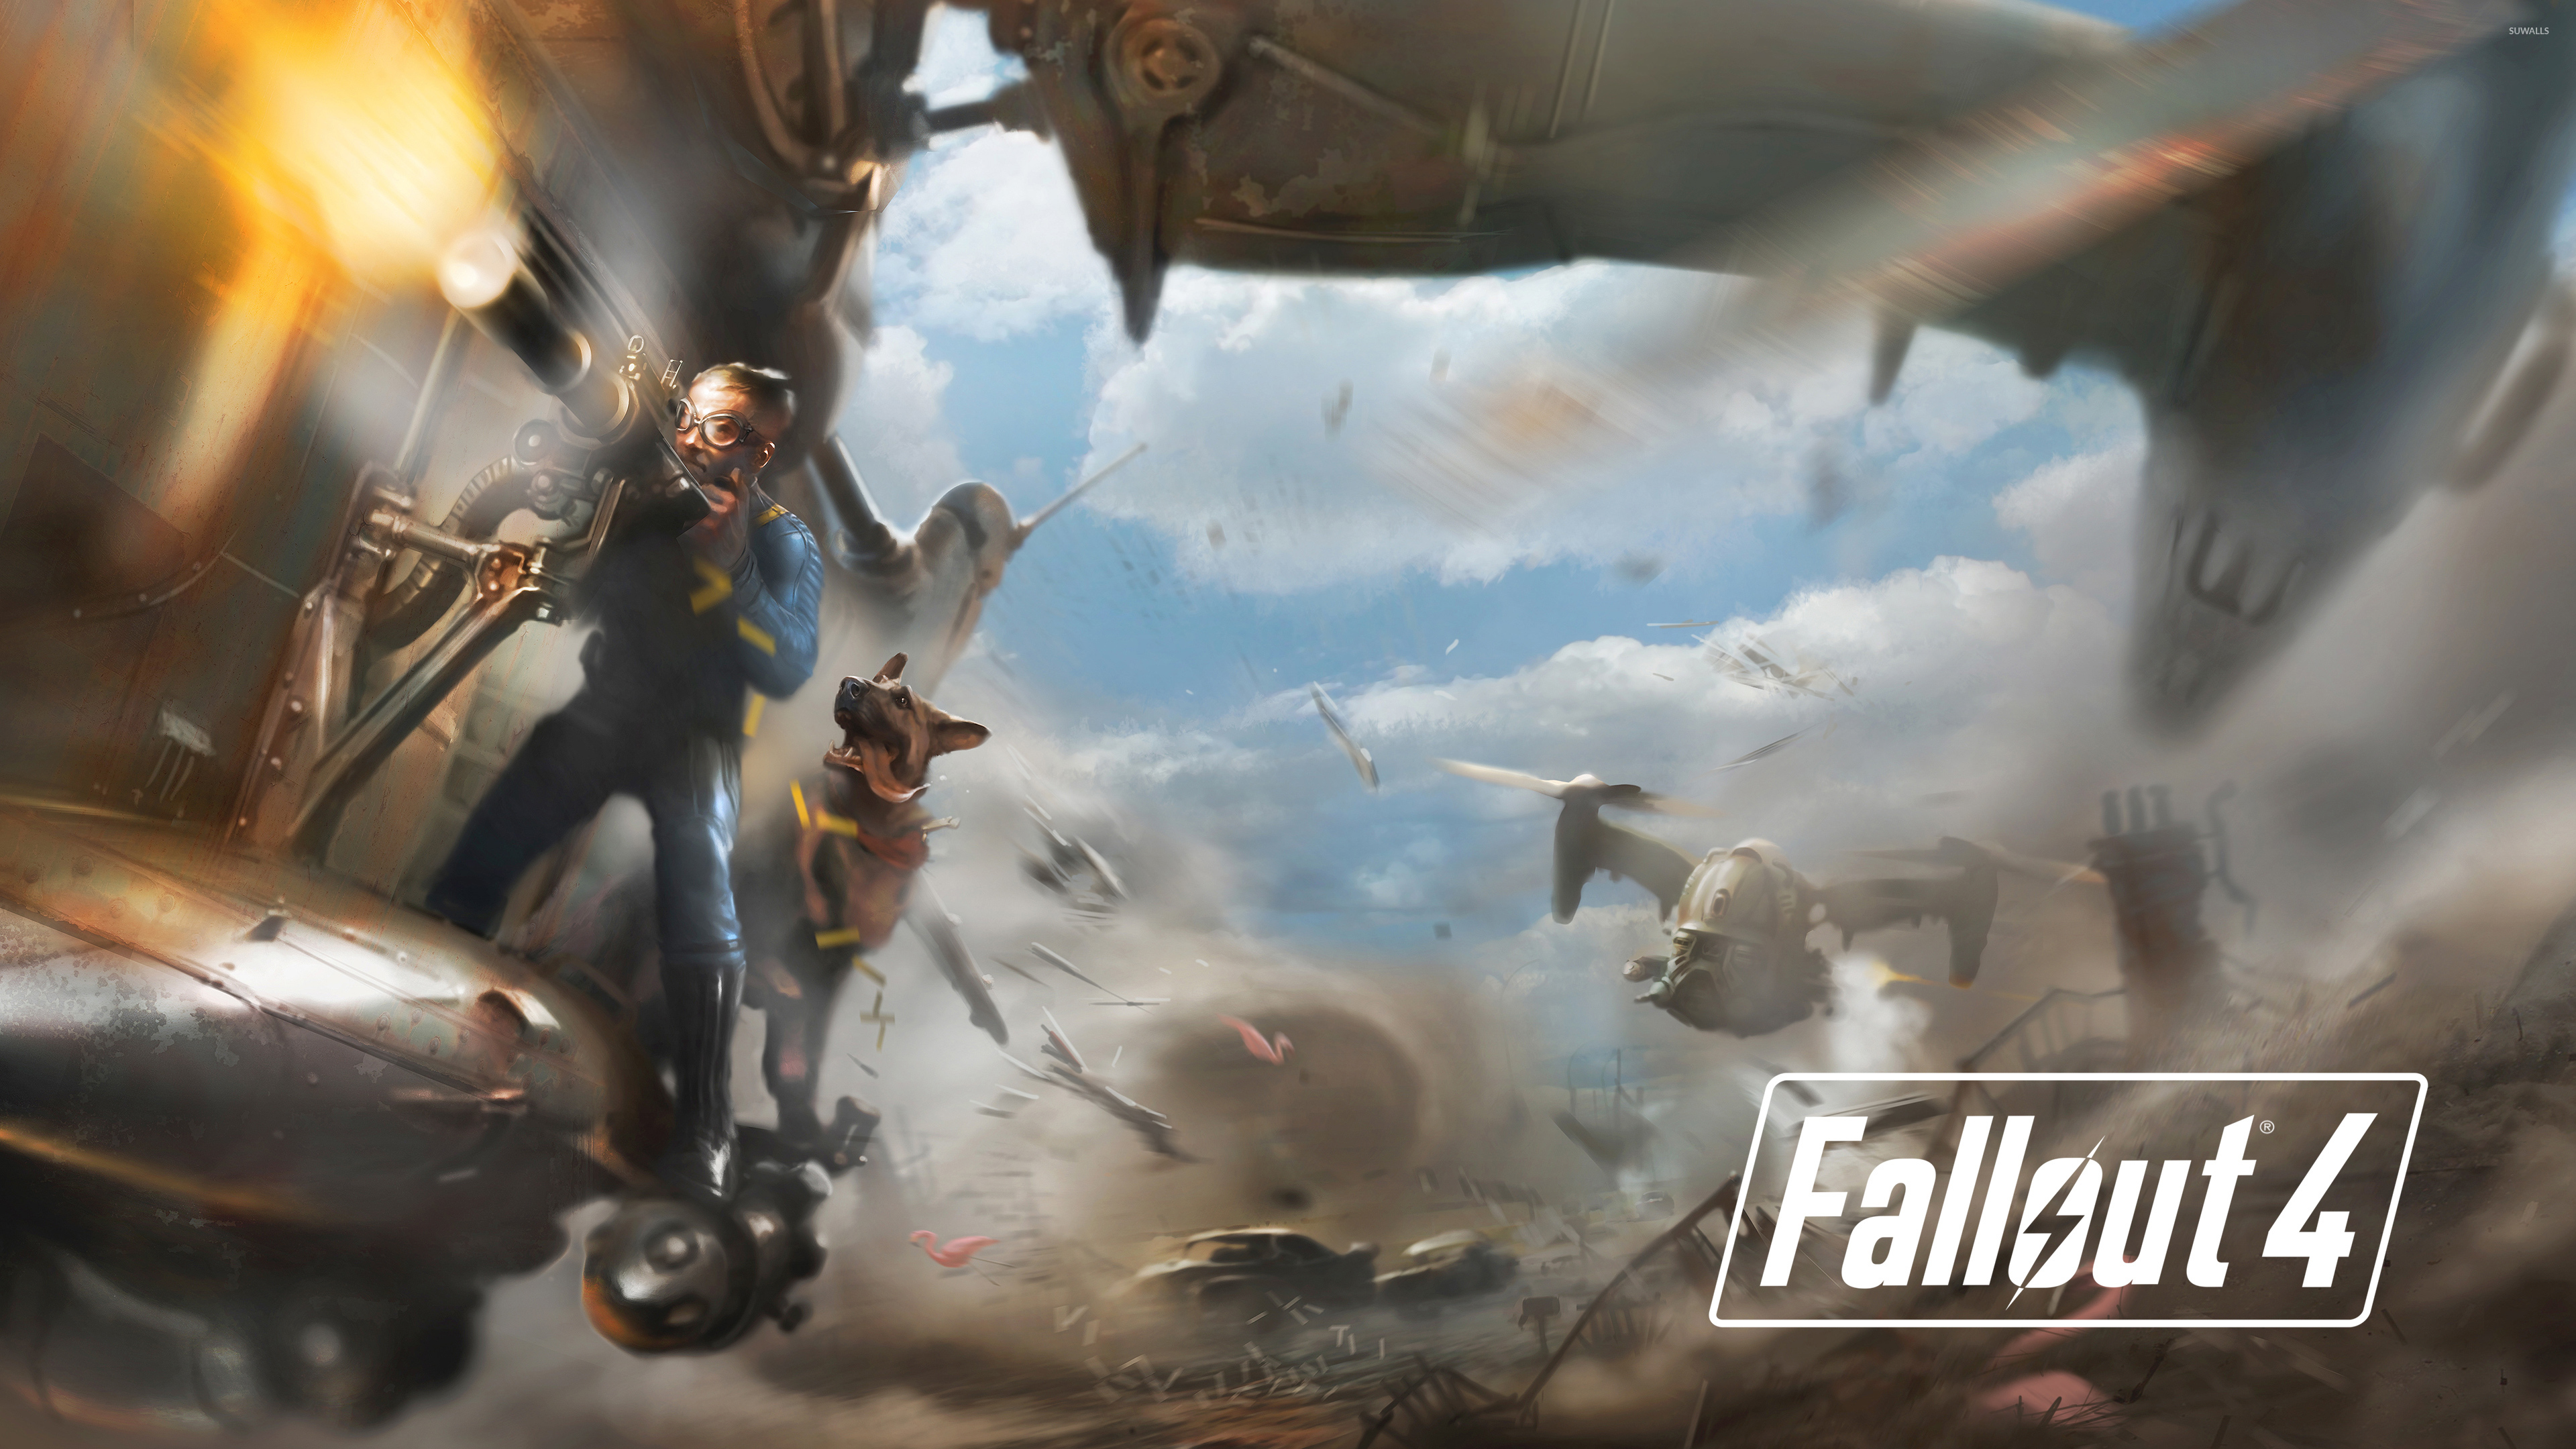 Battle in Fallout 4 wallpaper - Game